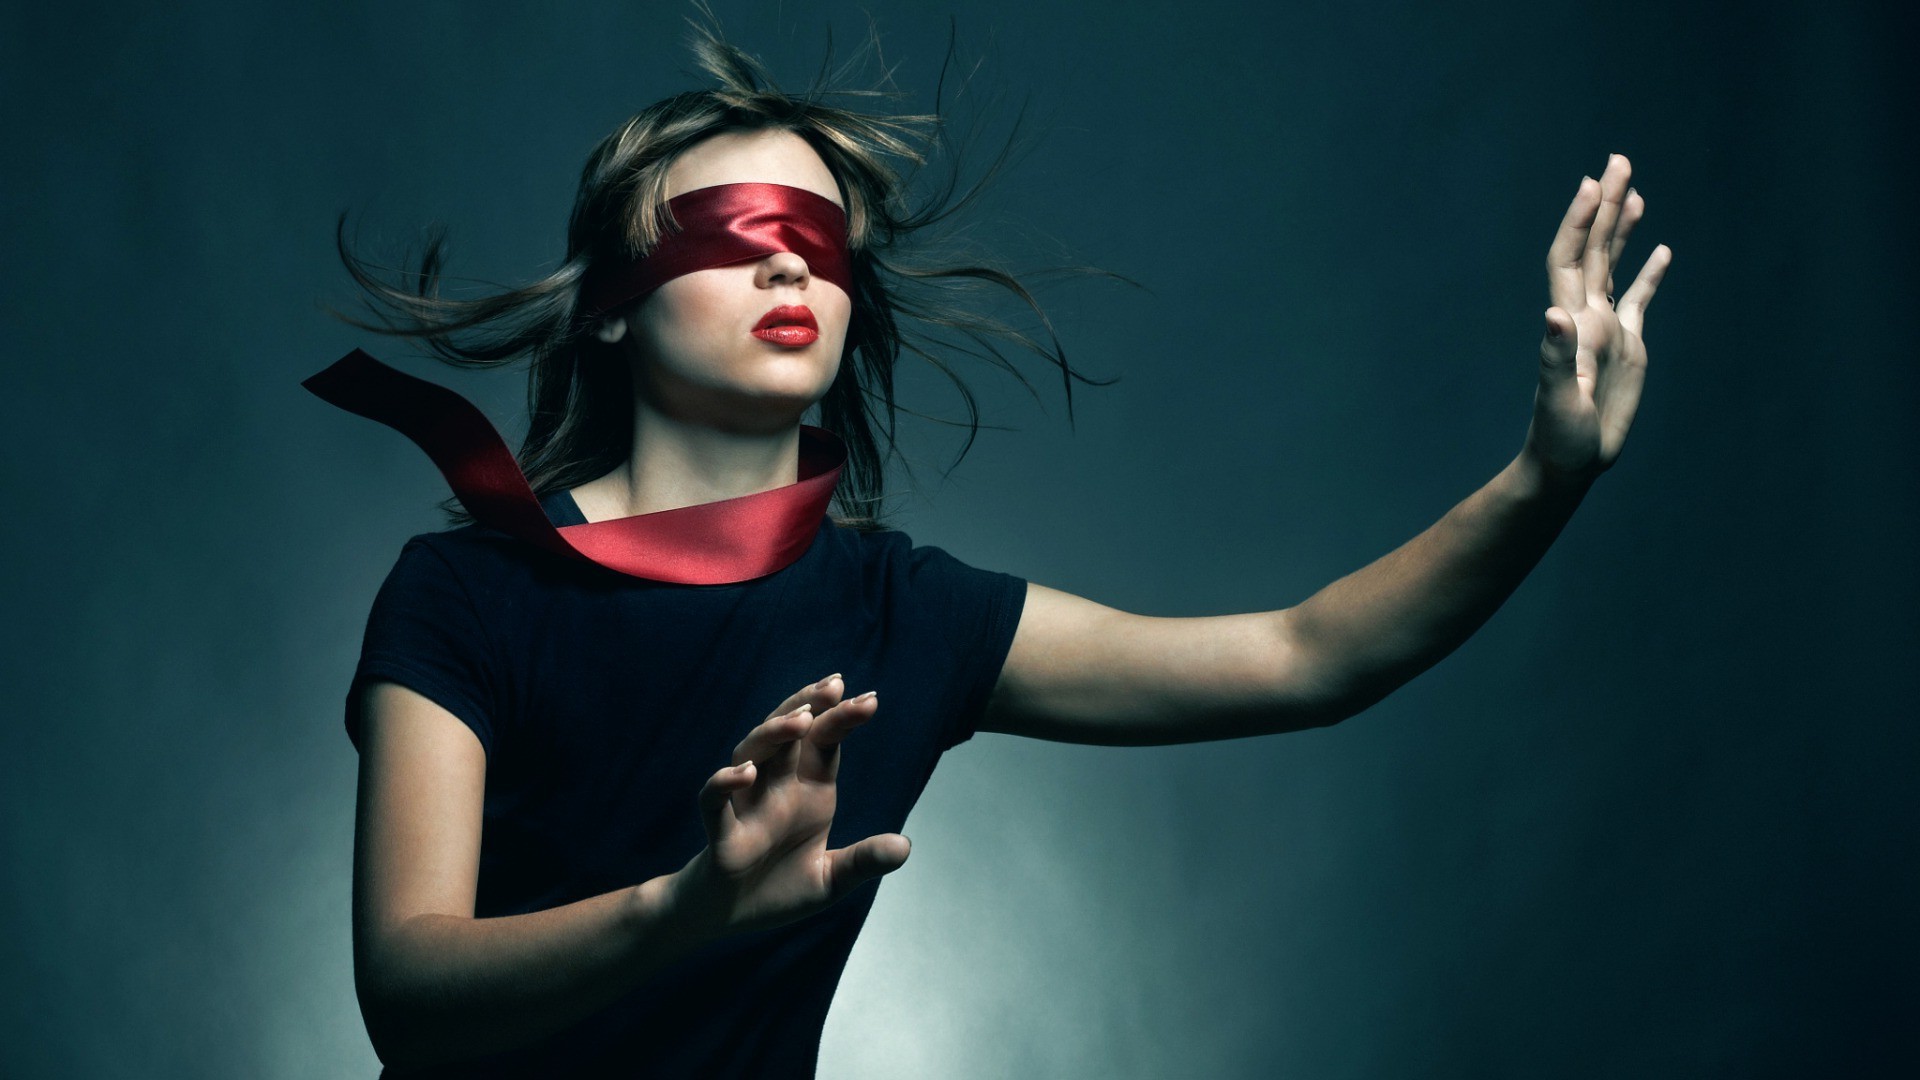 Women Blindfold Model Wallpapers Hd Desktop And Mobile Backgrounds Images, Photos, Reviews